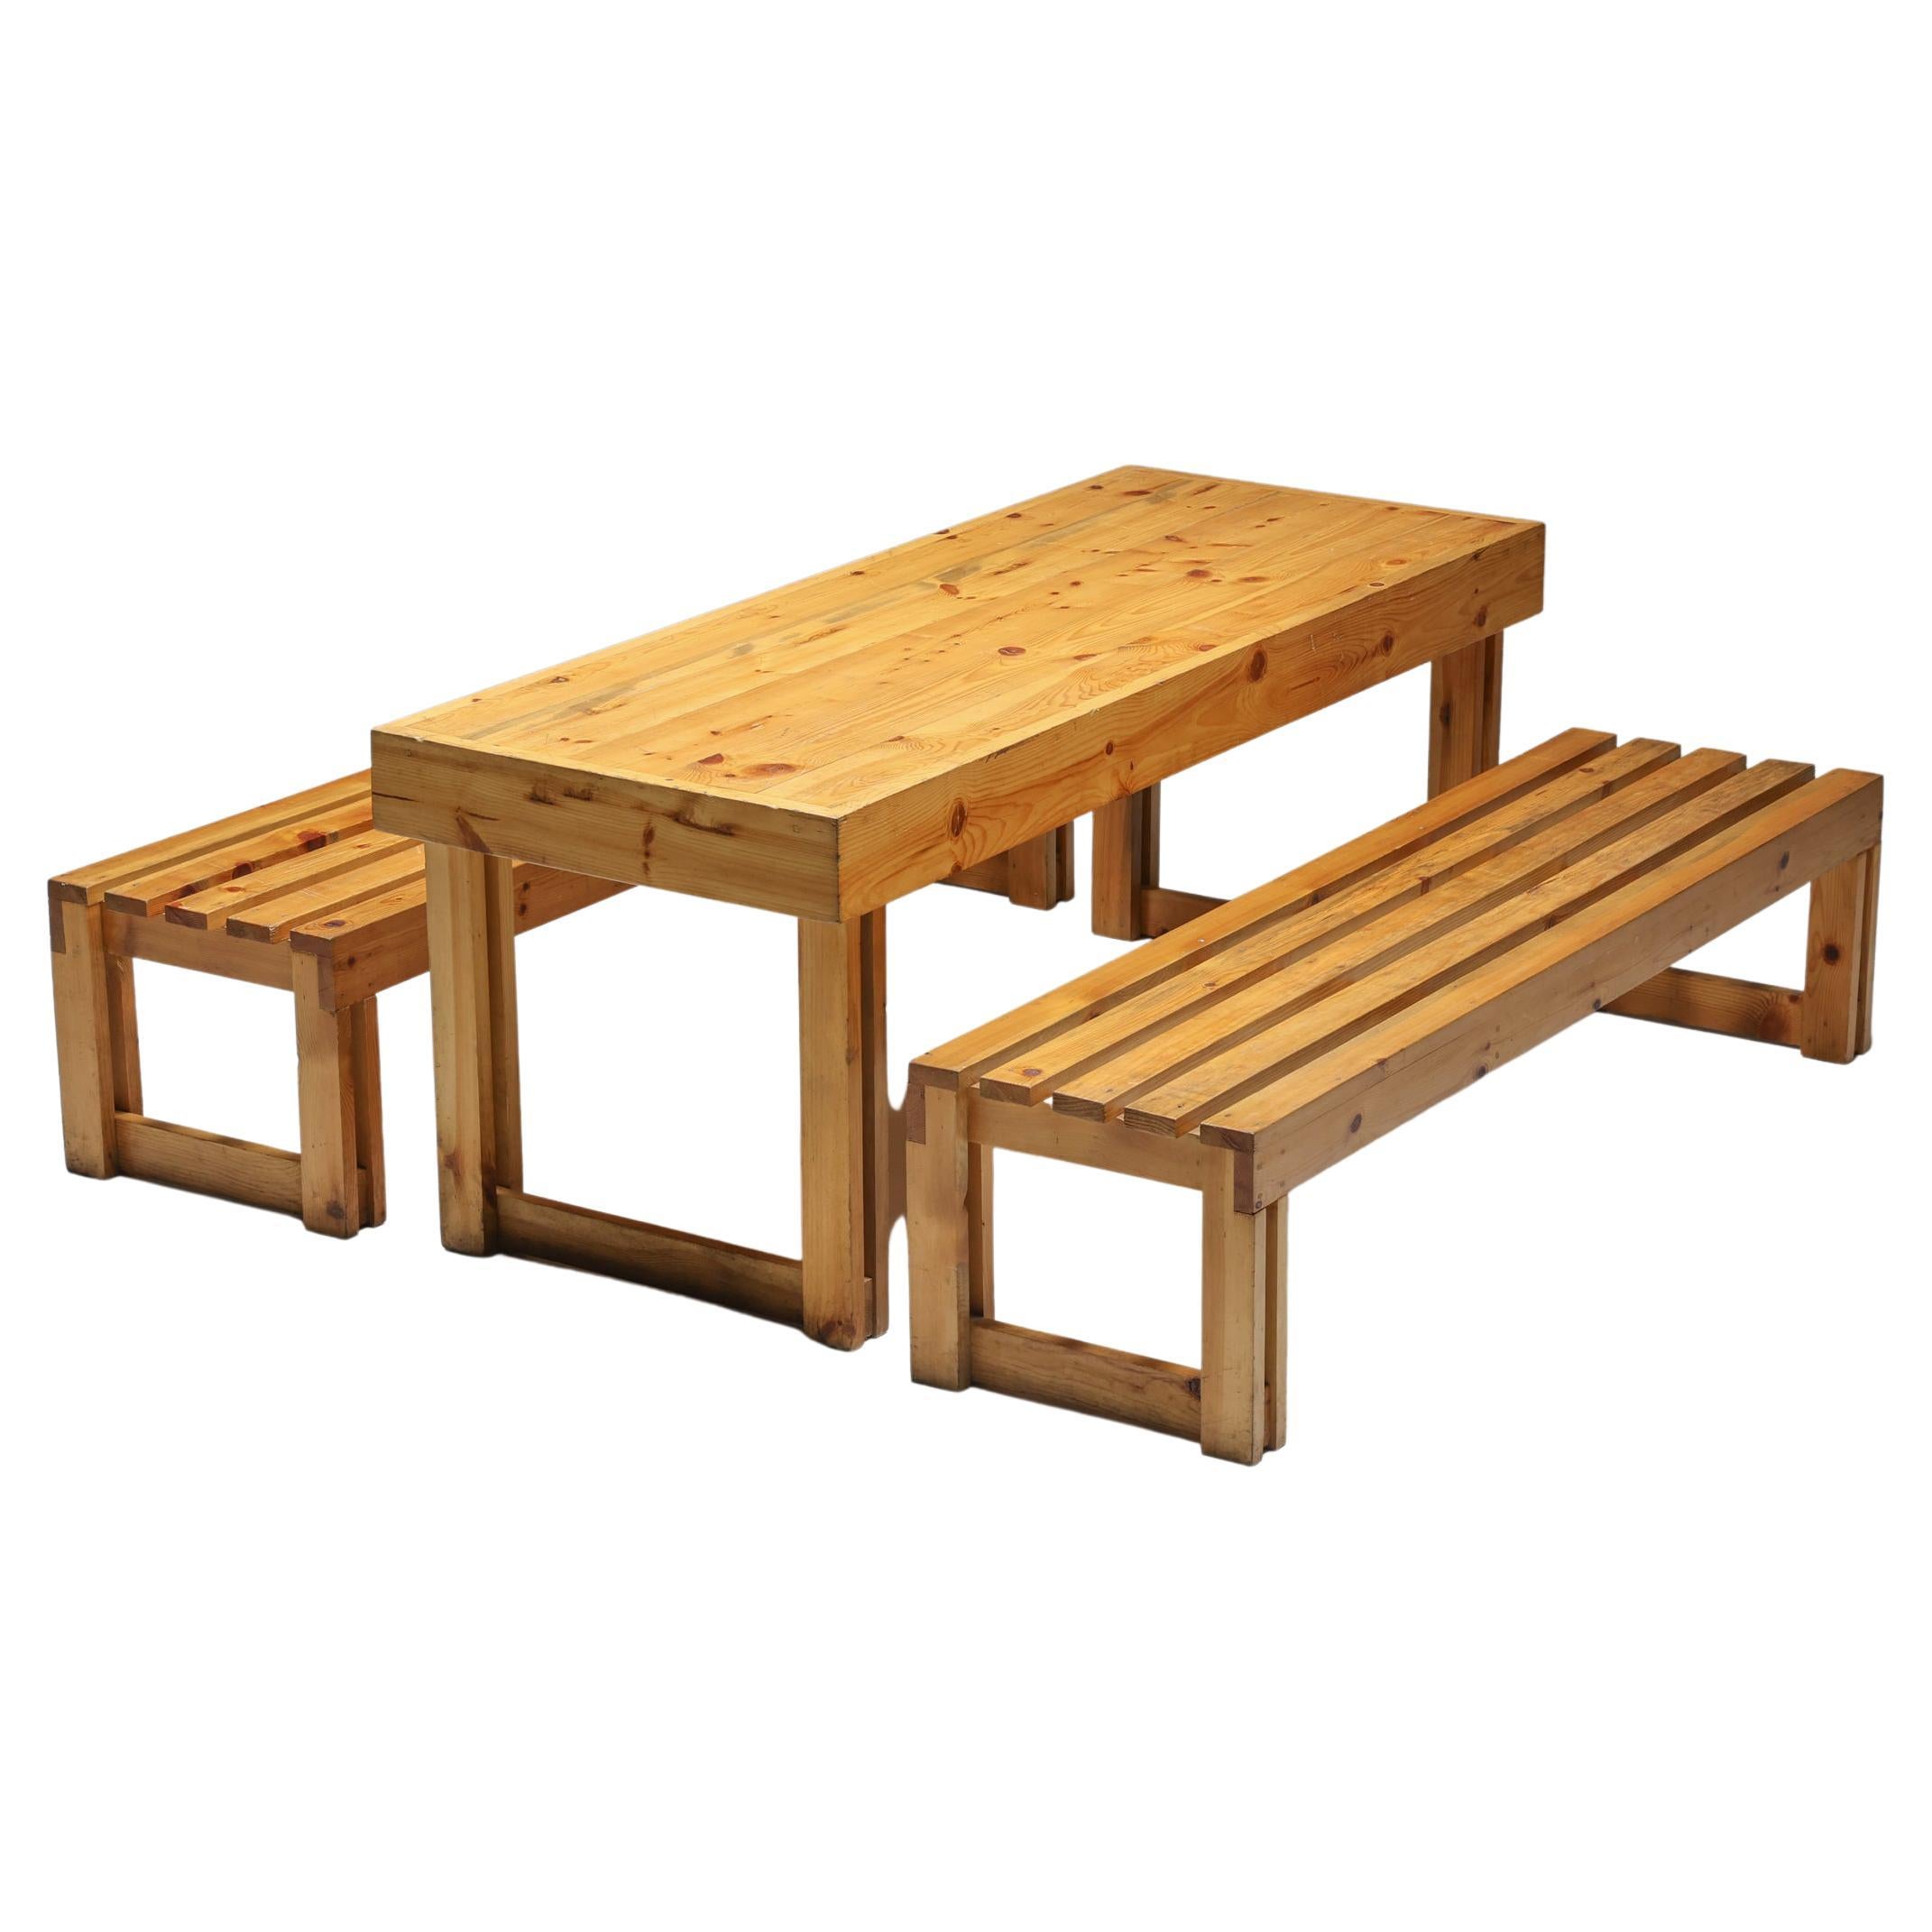 Italian Pine Bench and Table Set from Old Vineyard, Modernist, Italy, 1960's For Sale